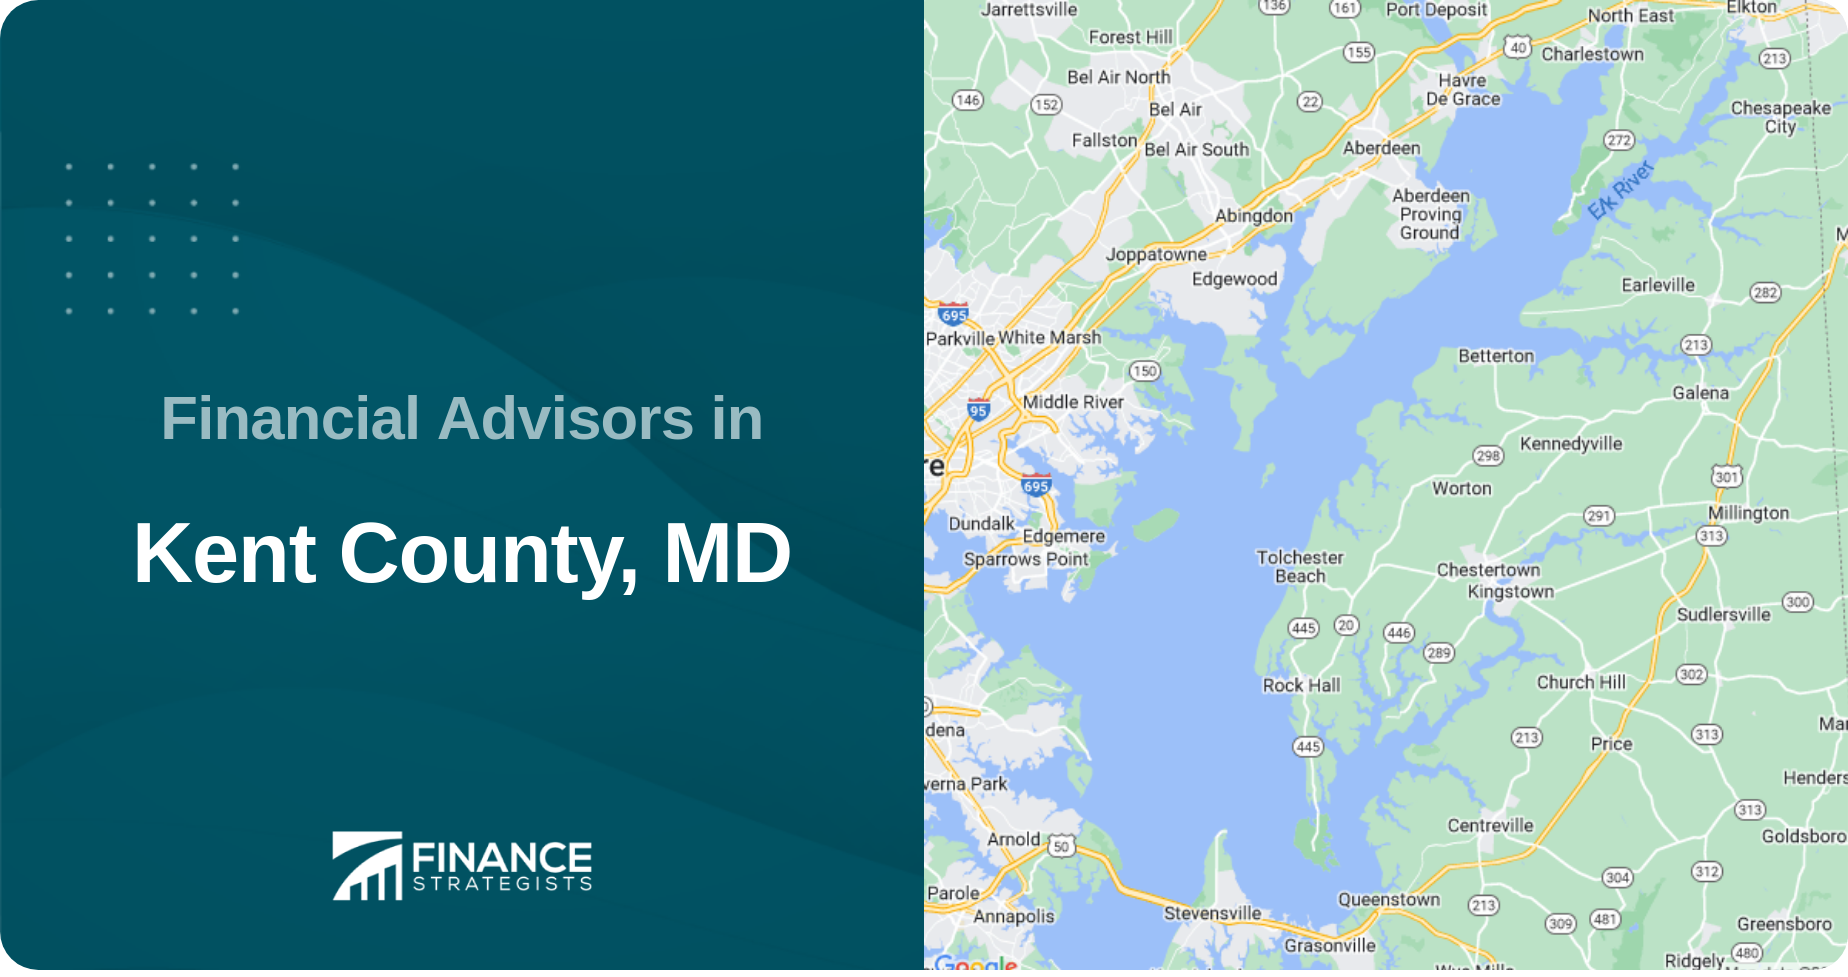 Financial Advisors in Kent County, MD